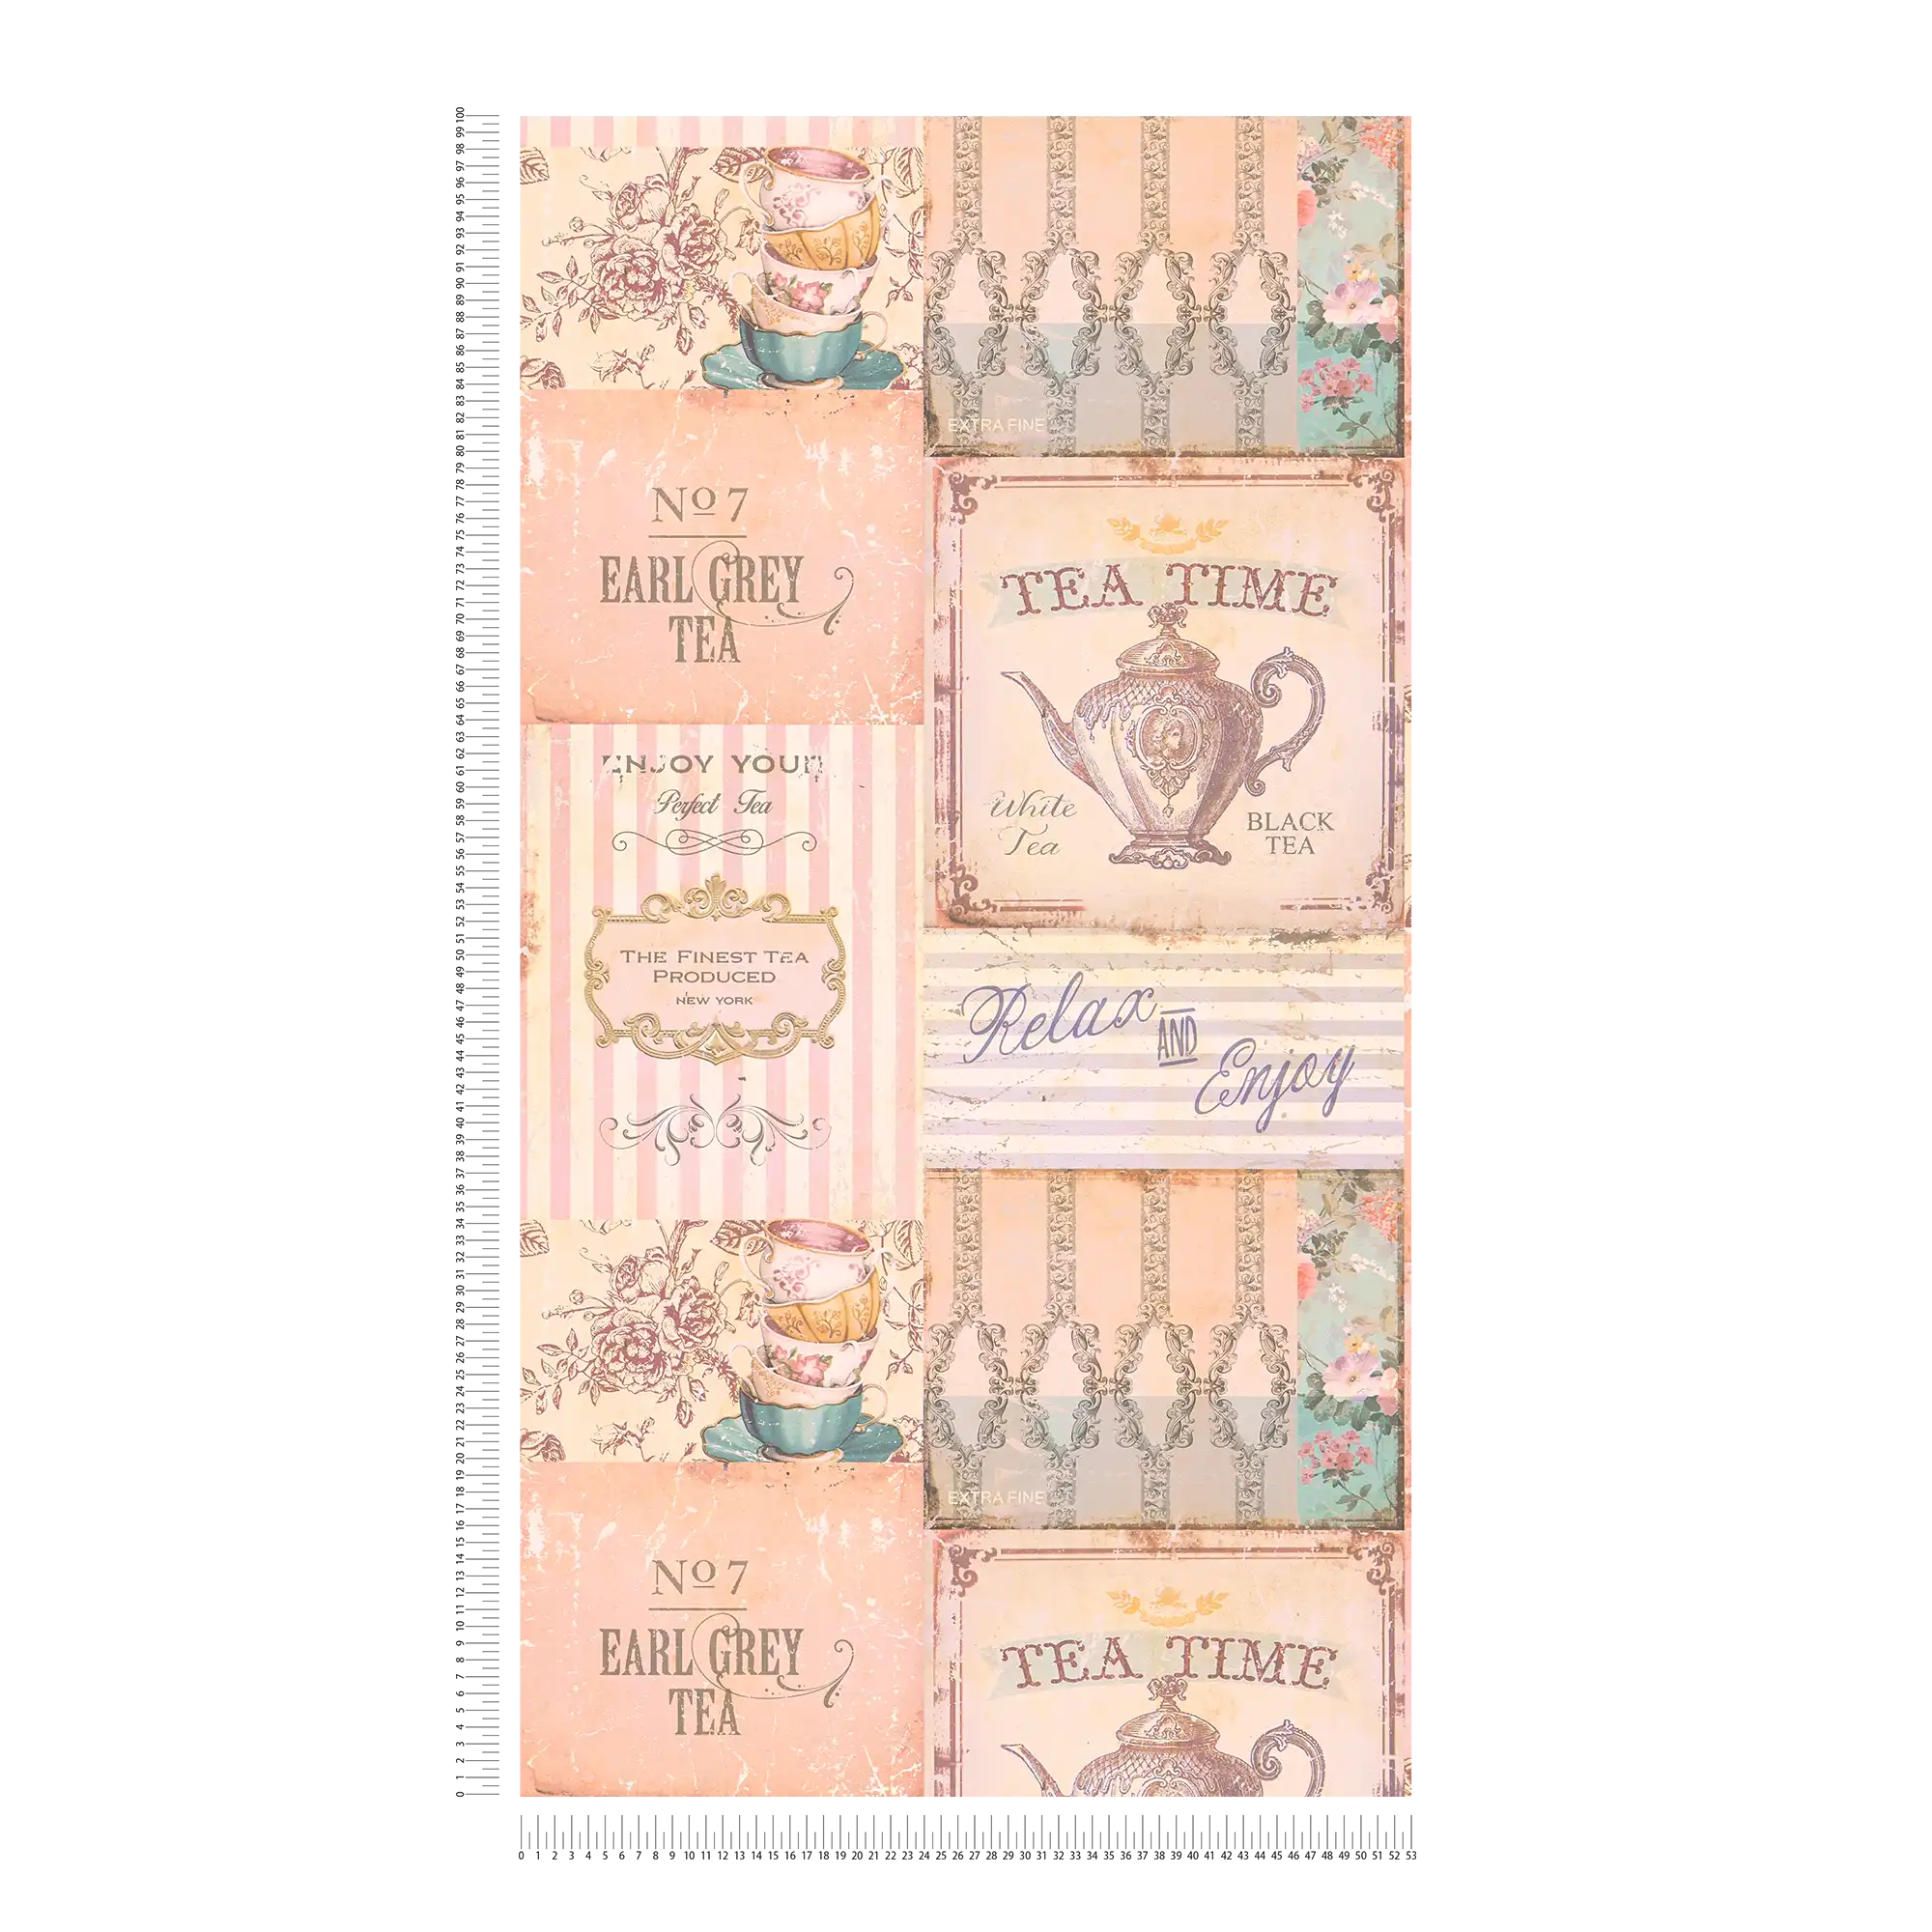             Kitchen wallpaper Tea Time collage in country style - pink, grey, blue
        